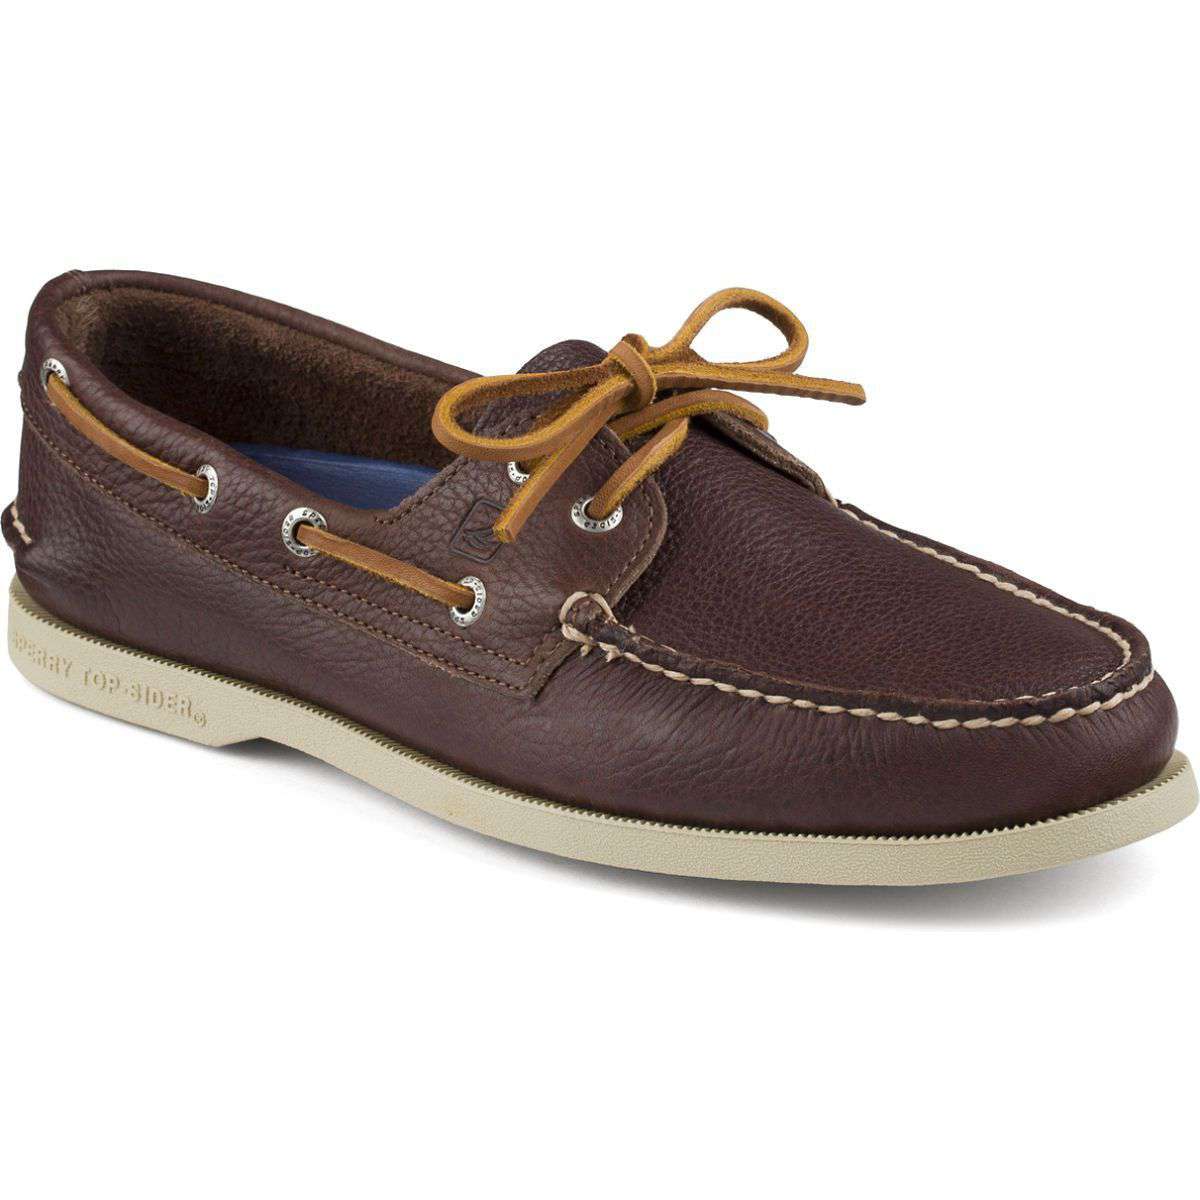 Men's Authentic Original Tumbled 2-Eye Boat Shoe in Brown by Sperry - Country Club Prep